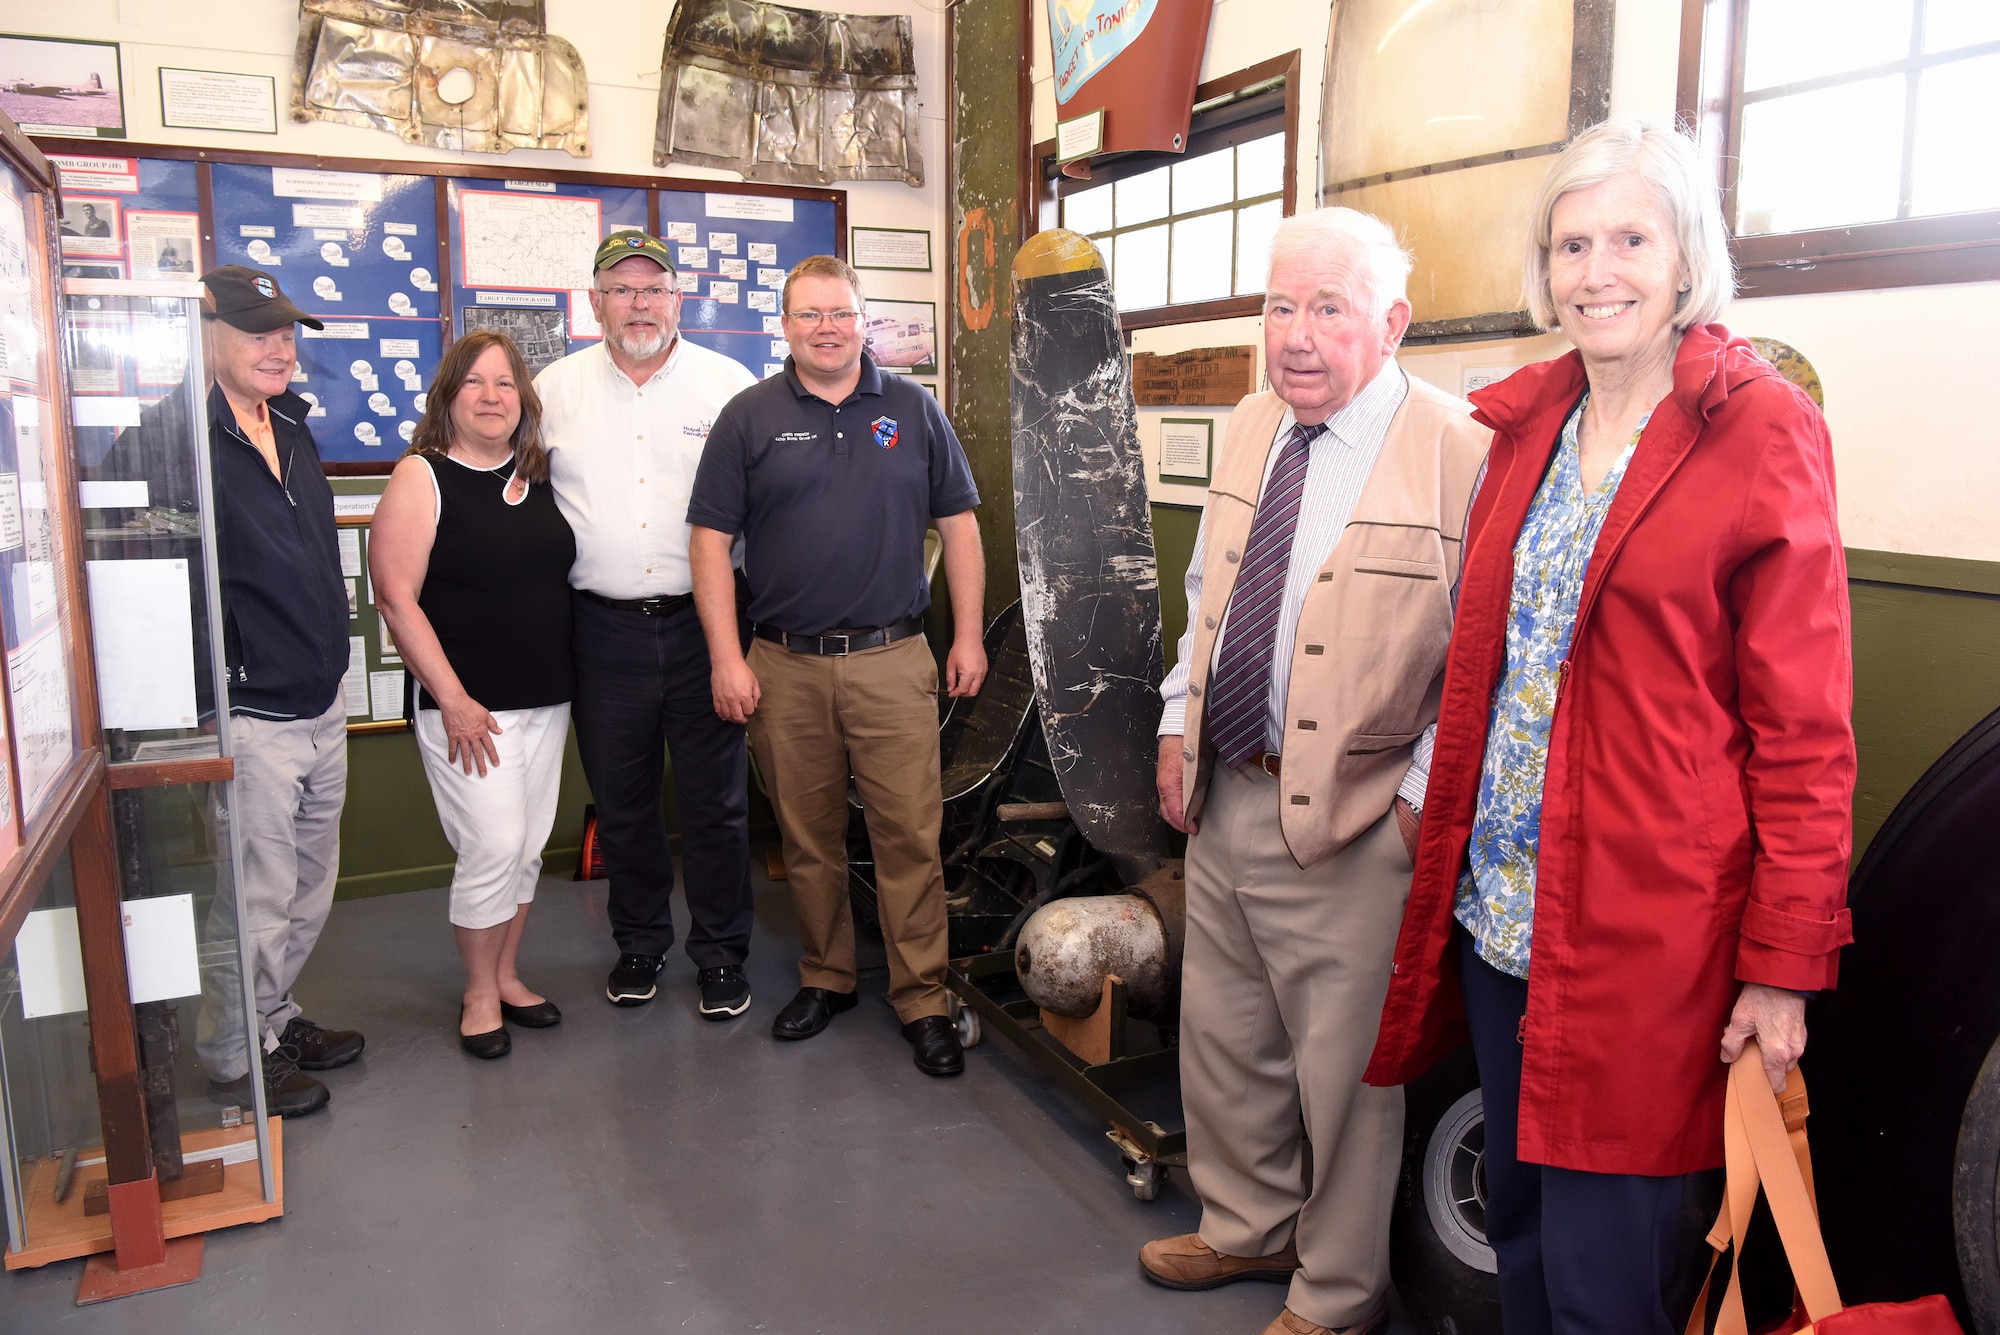 Family, friends and others honoring the 447th Bomb Group (Rattlesden) visited the 100th Bomb Group Memorial Museum at Thorpe Abbotts as part of their “Return to Rattlesden” event June 11 to 13, 2022. Both bomb groups are part of Eighth Air Force and were home to B-17 Flying Fortresses during World War II. Although no veterans were able to make the journey to England for the event, the 447th BG representatives – some from the States – came to honor and remember veterans past and present.